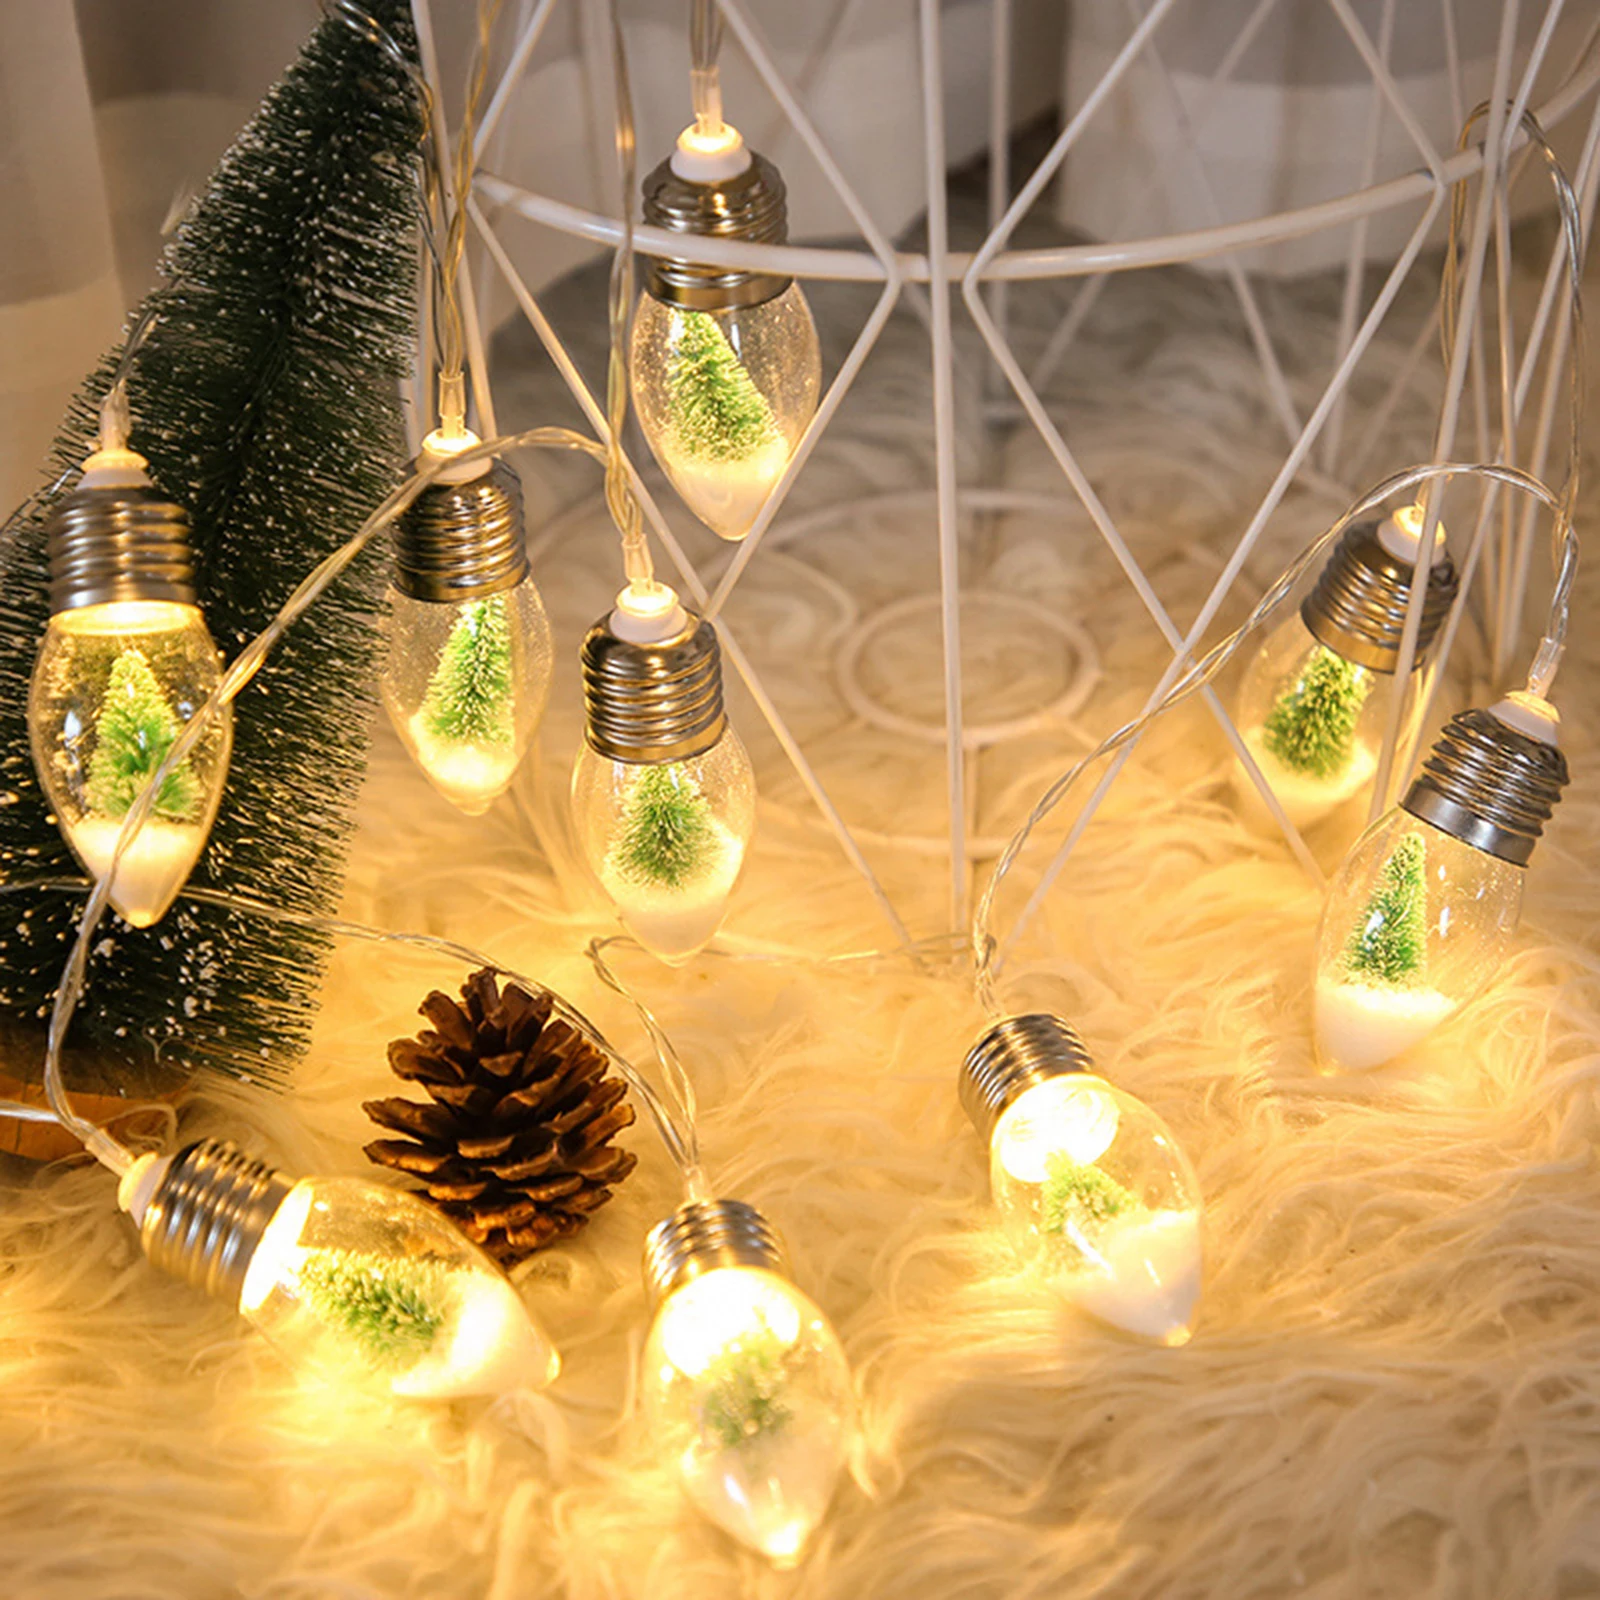 Clear Glass Wish Bottle LED String Light 10 LED Vintage Garland Fairy Lamp Christmas Tree Garden Party Wedding Home Decoration